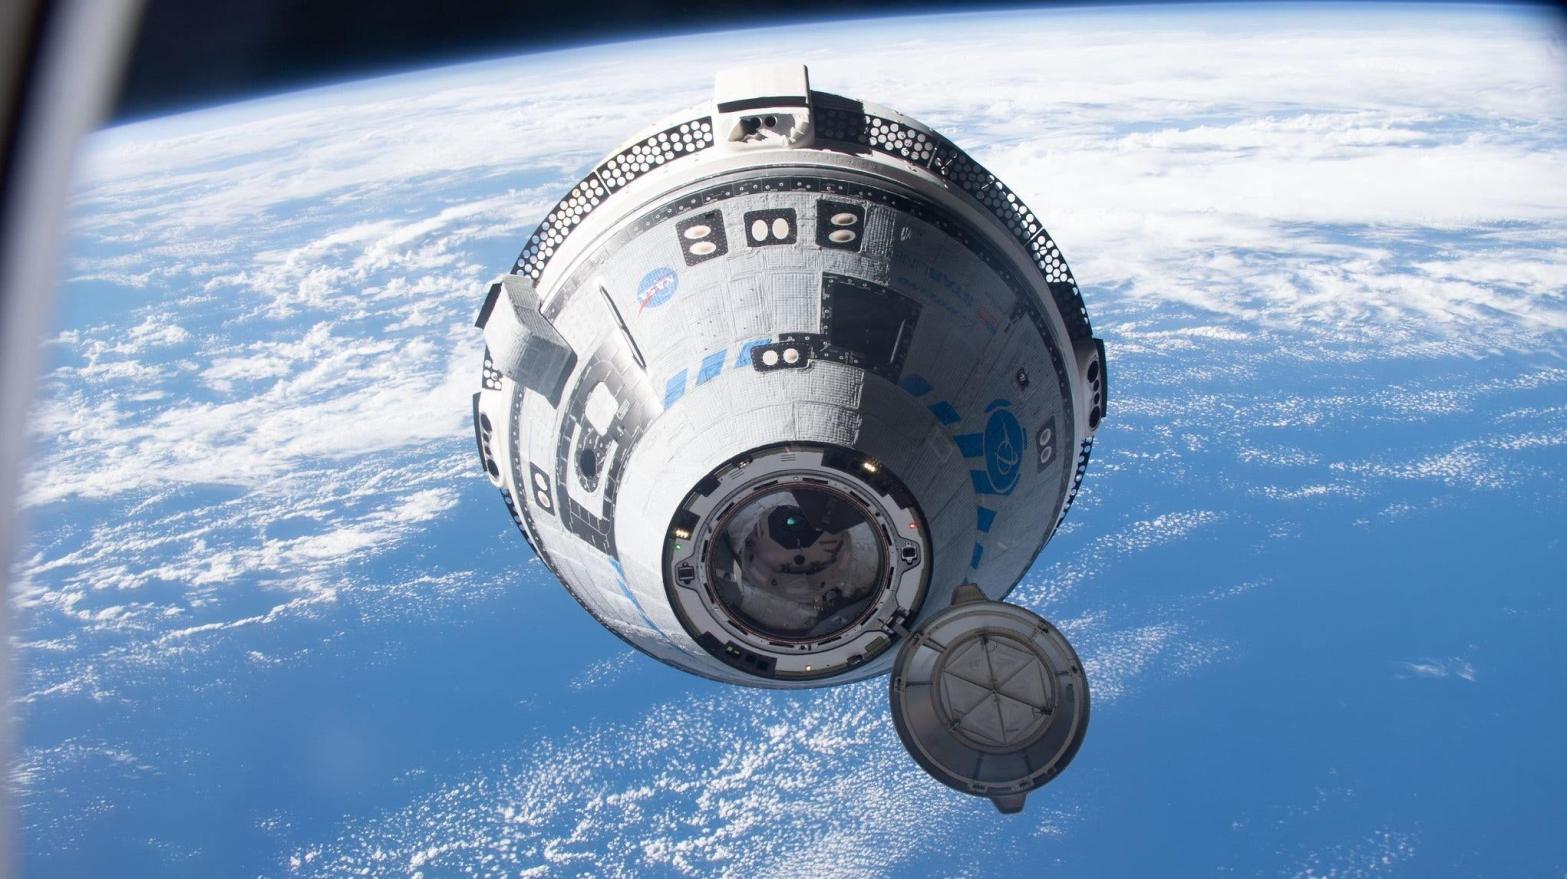 Boeing's CST-100 Starliner crew ship approaching the ISS for the Orbital Flight Test-2 mission in May 2022. (Photo: NASA)